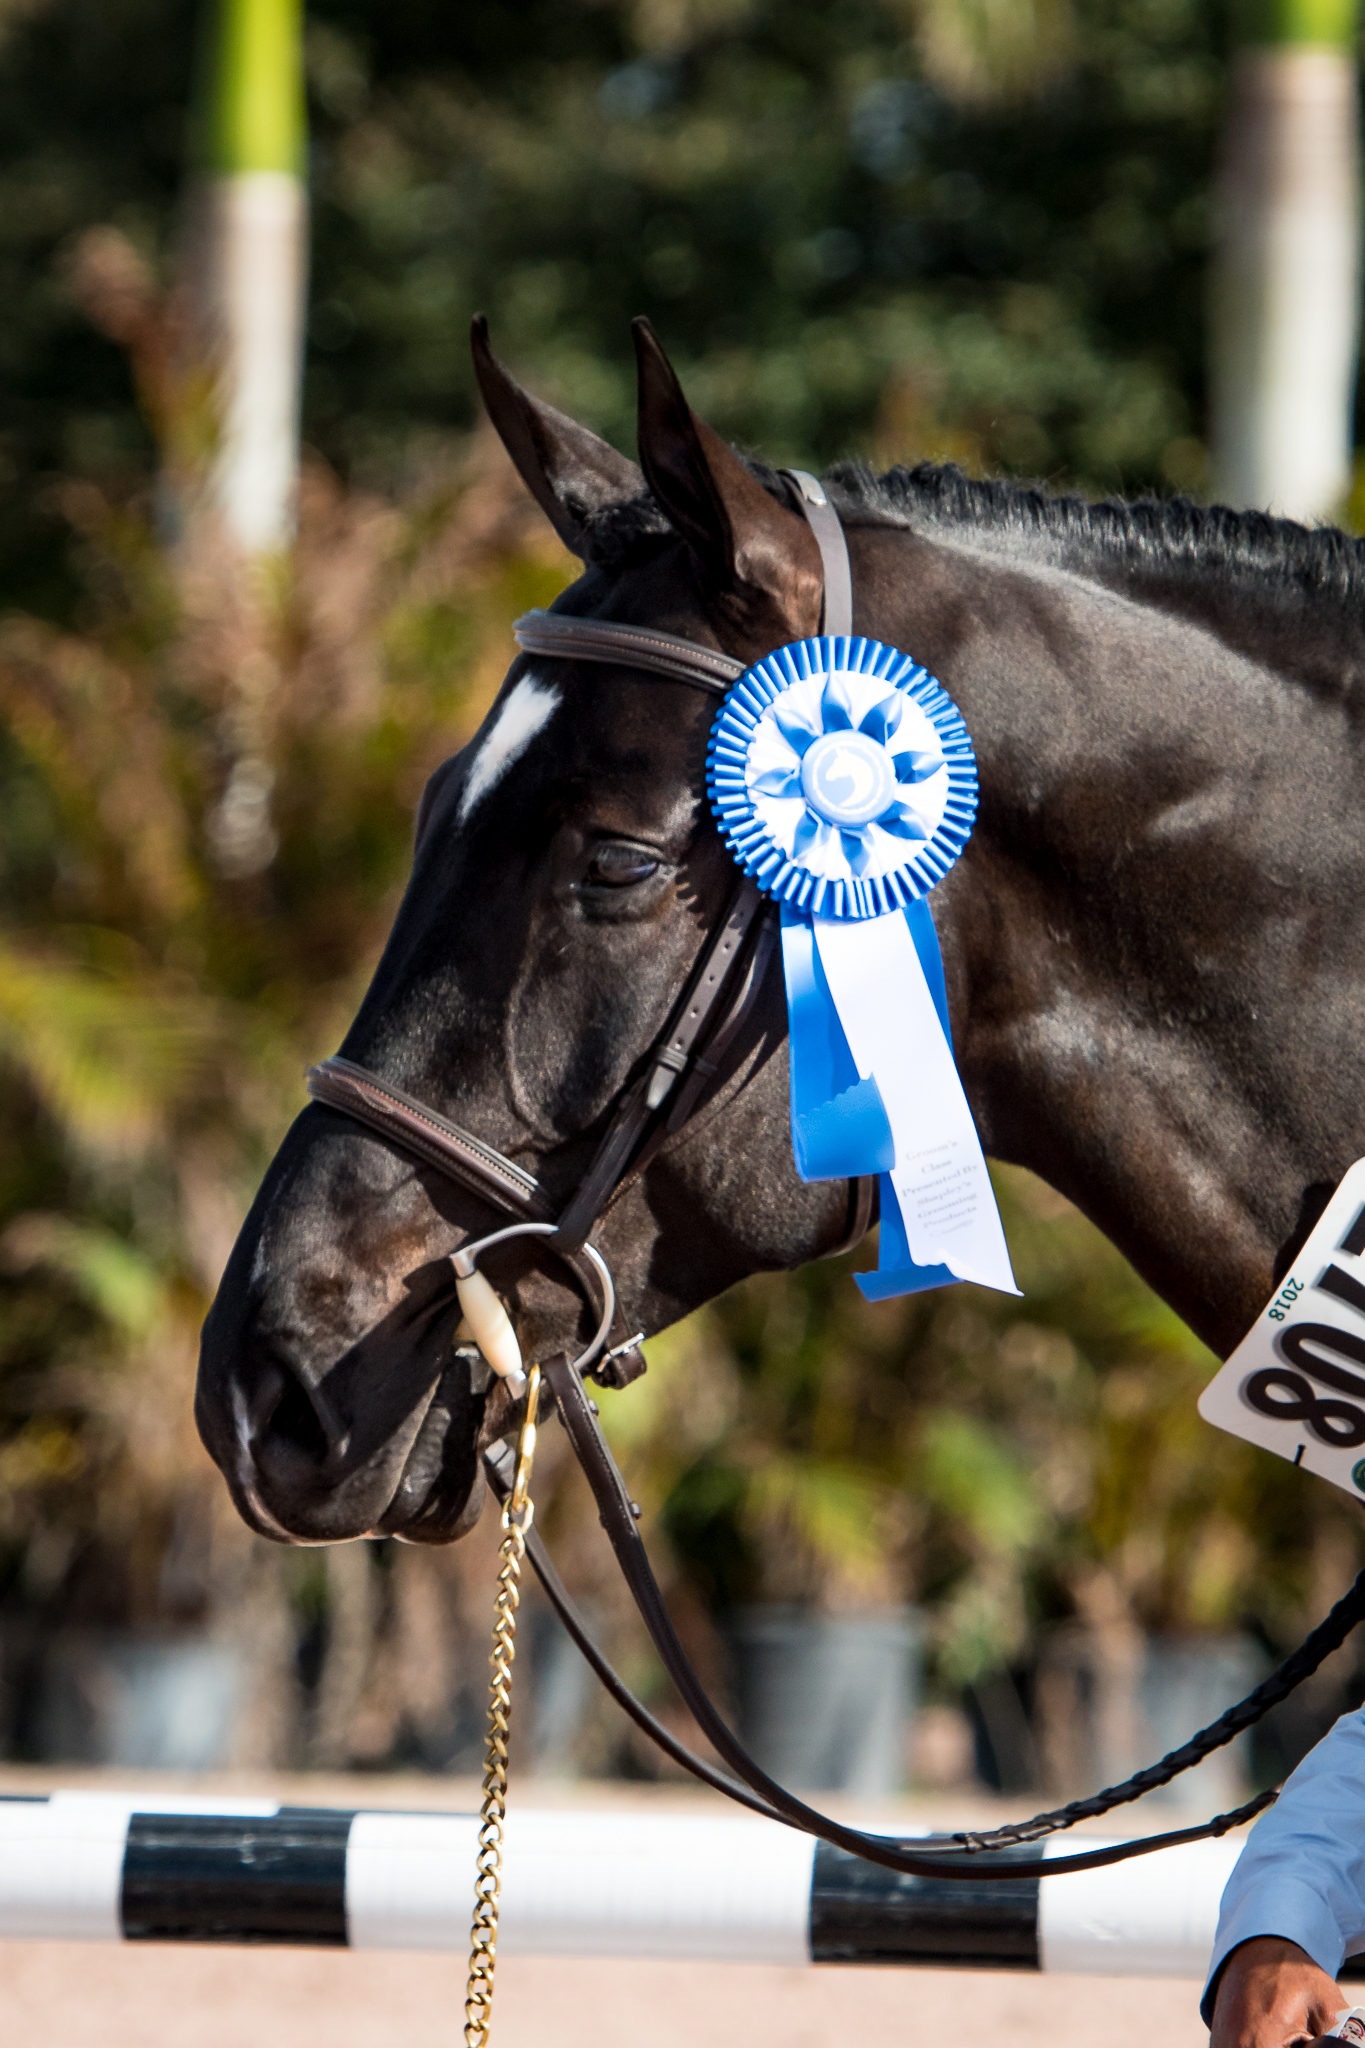 The Winter Equestrian Festival brings some of the world's top horses and riders to Wellington International